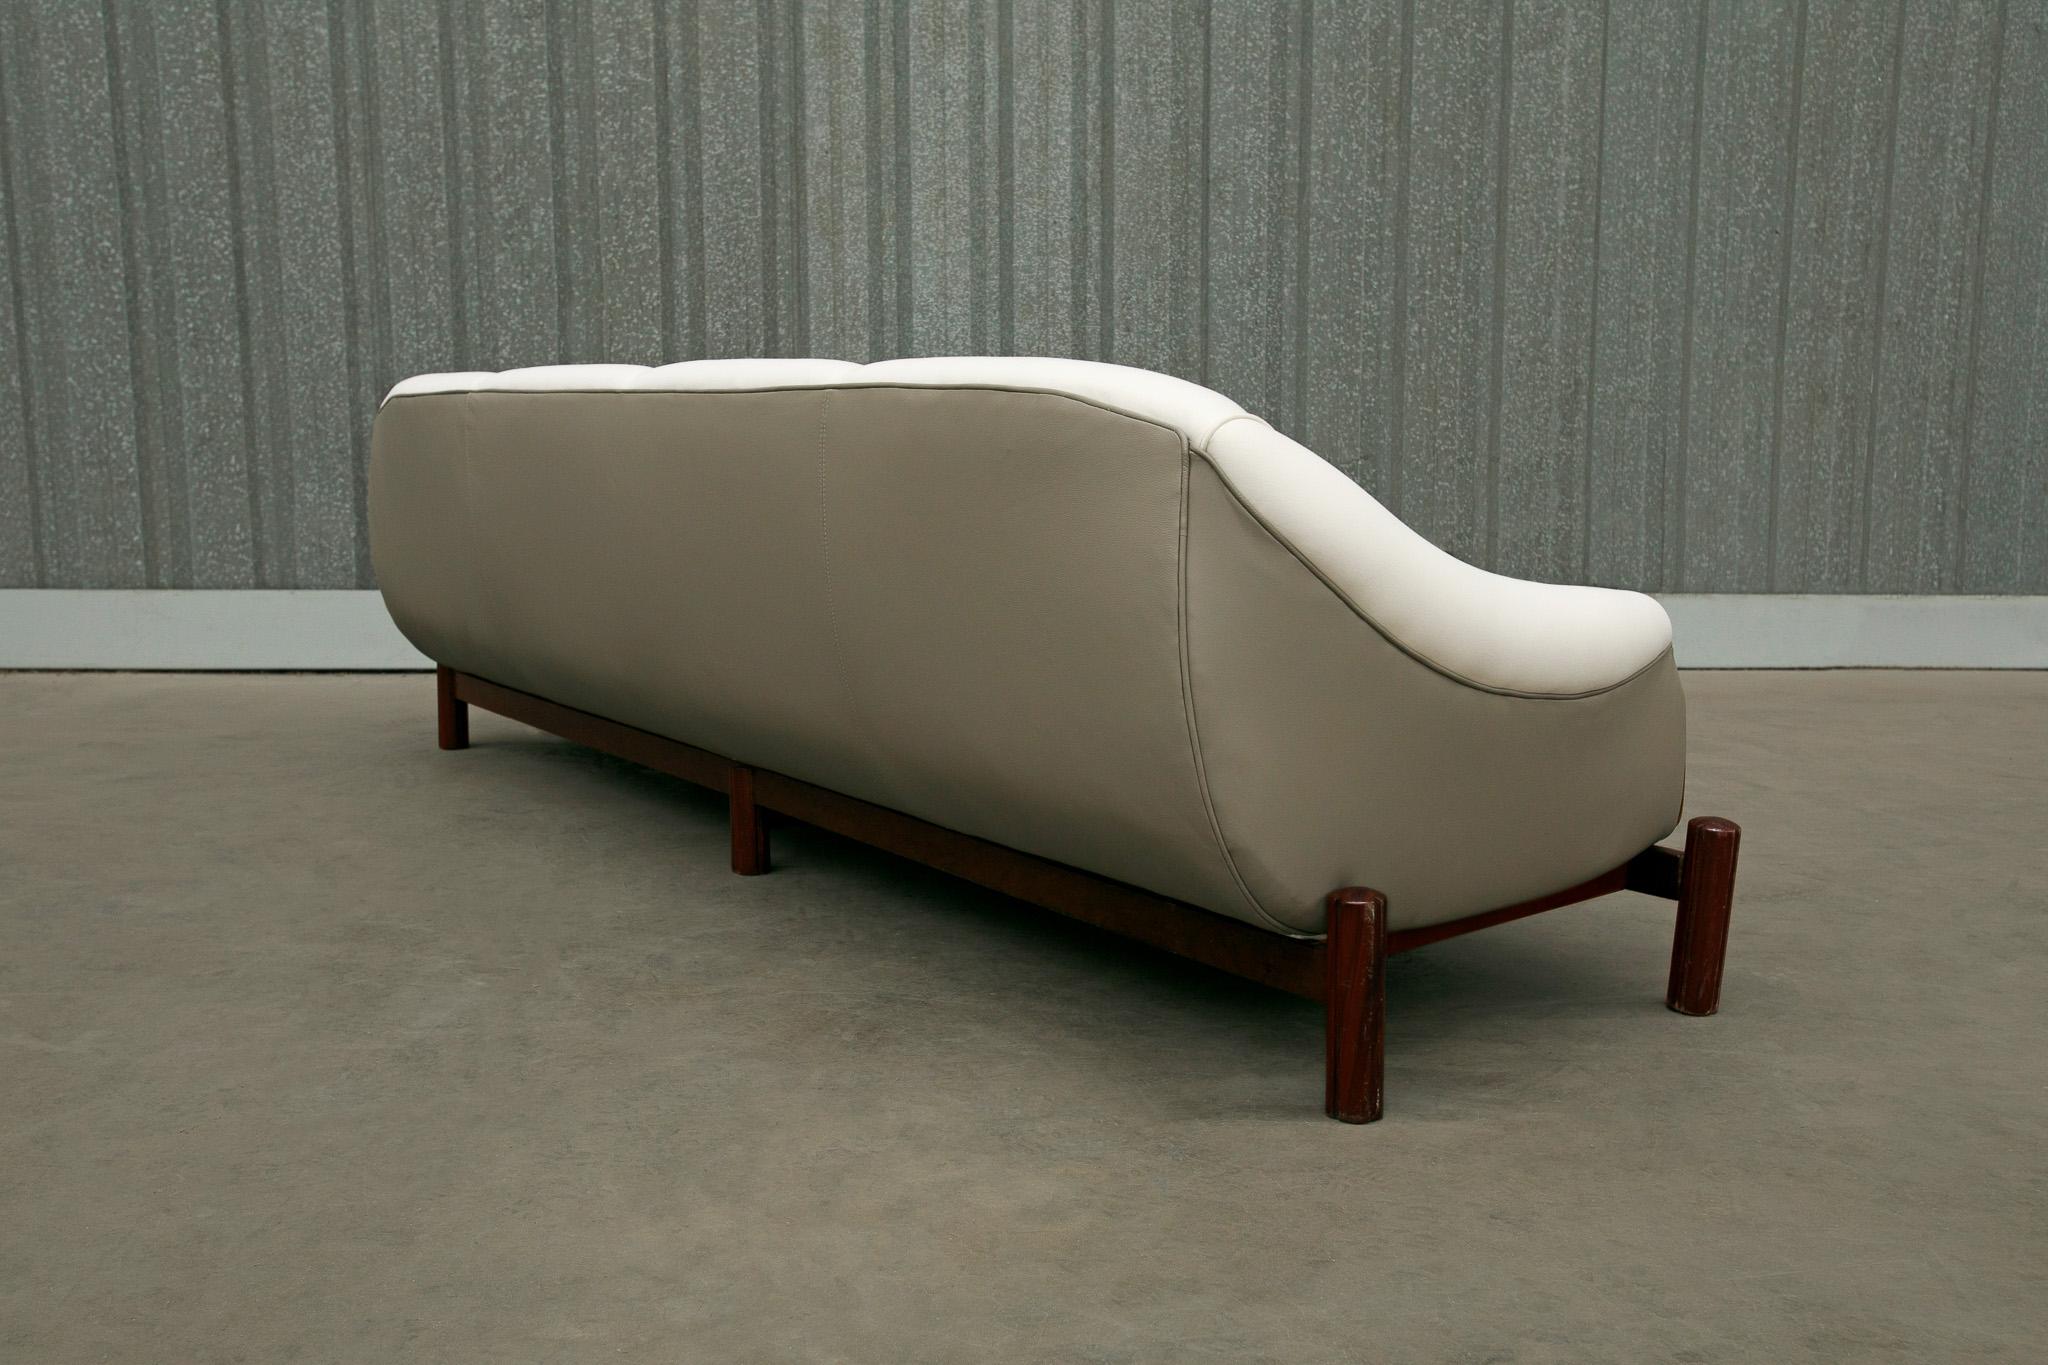 Brazilian Modern Sofa in Hardwood, Grey Leather & White Fabric by Cimo, 1960s In Good Condition For Sale In New York, NY